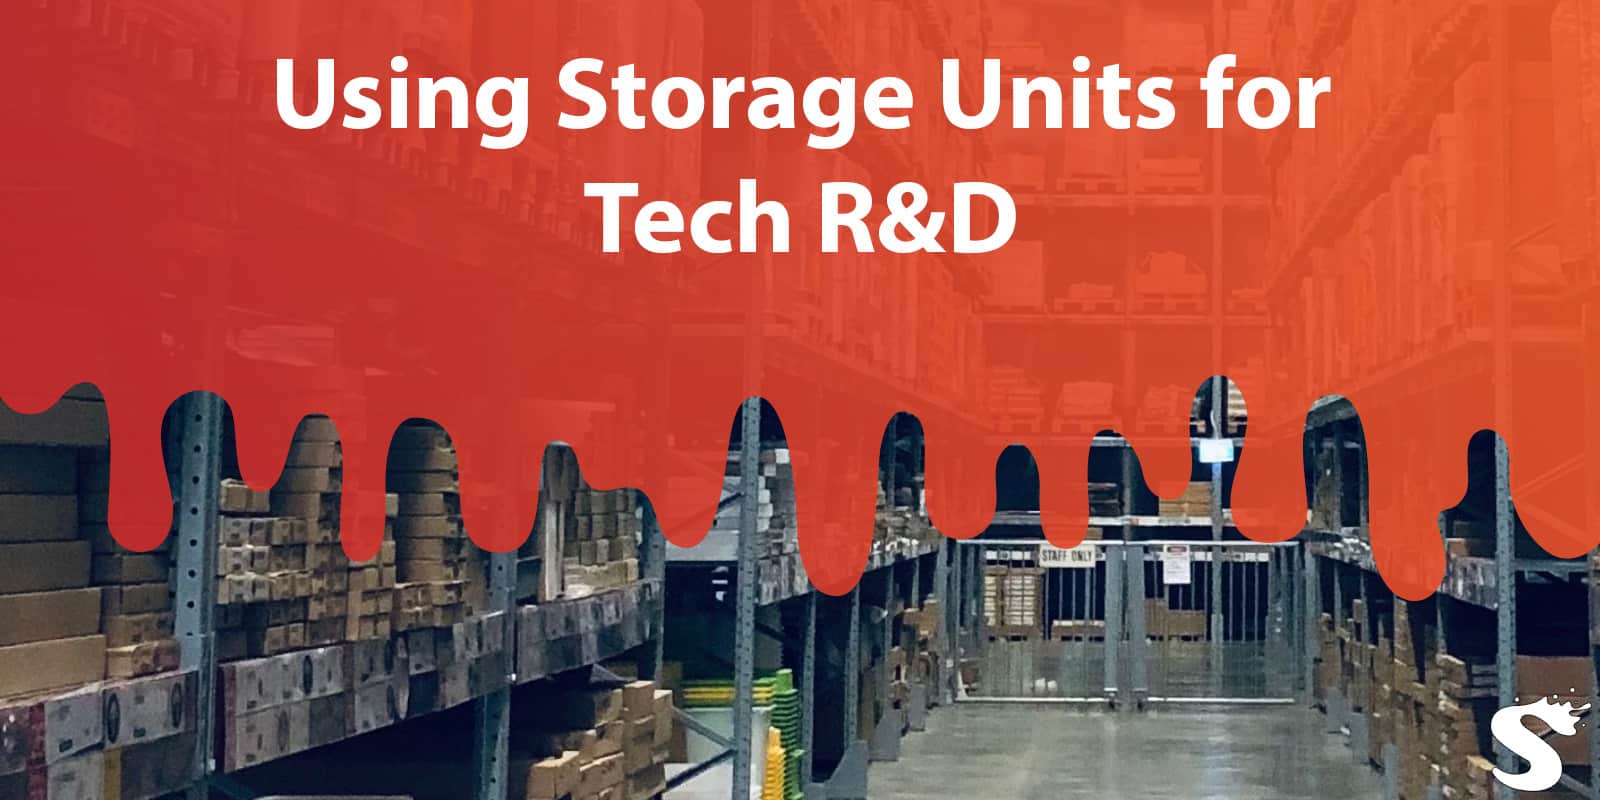 Using Storage Units for Tech R&D